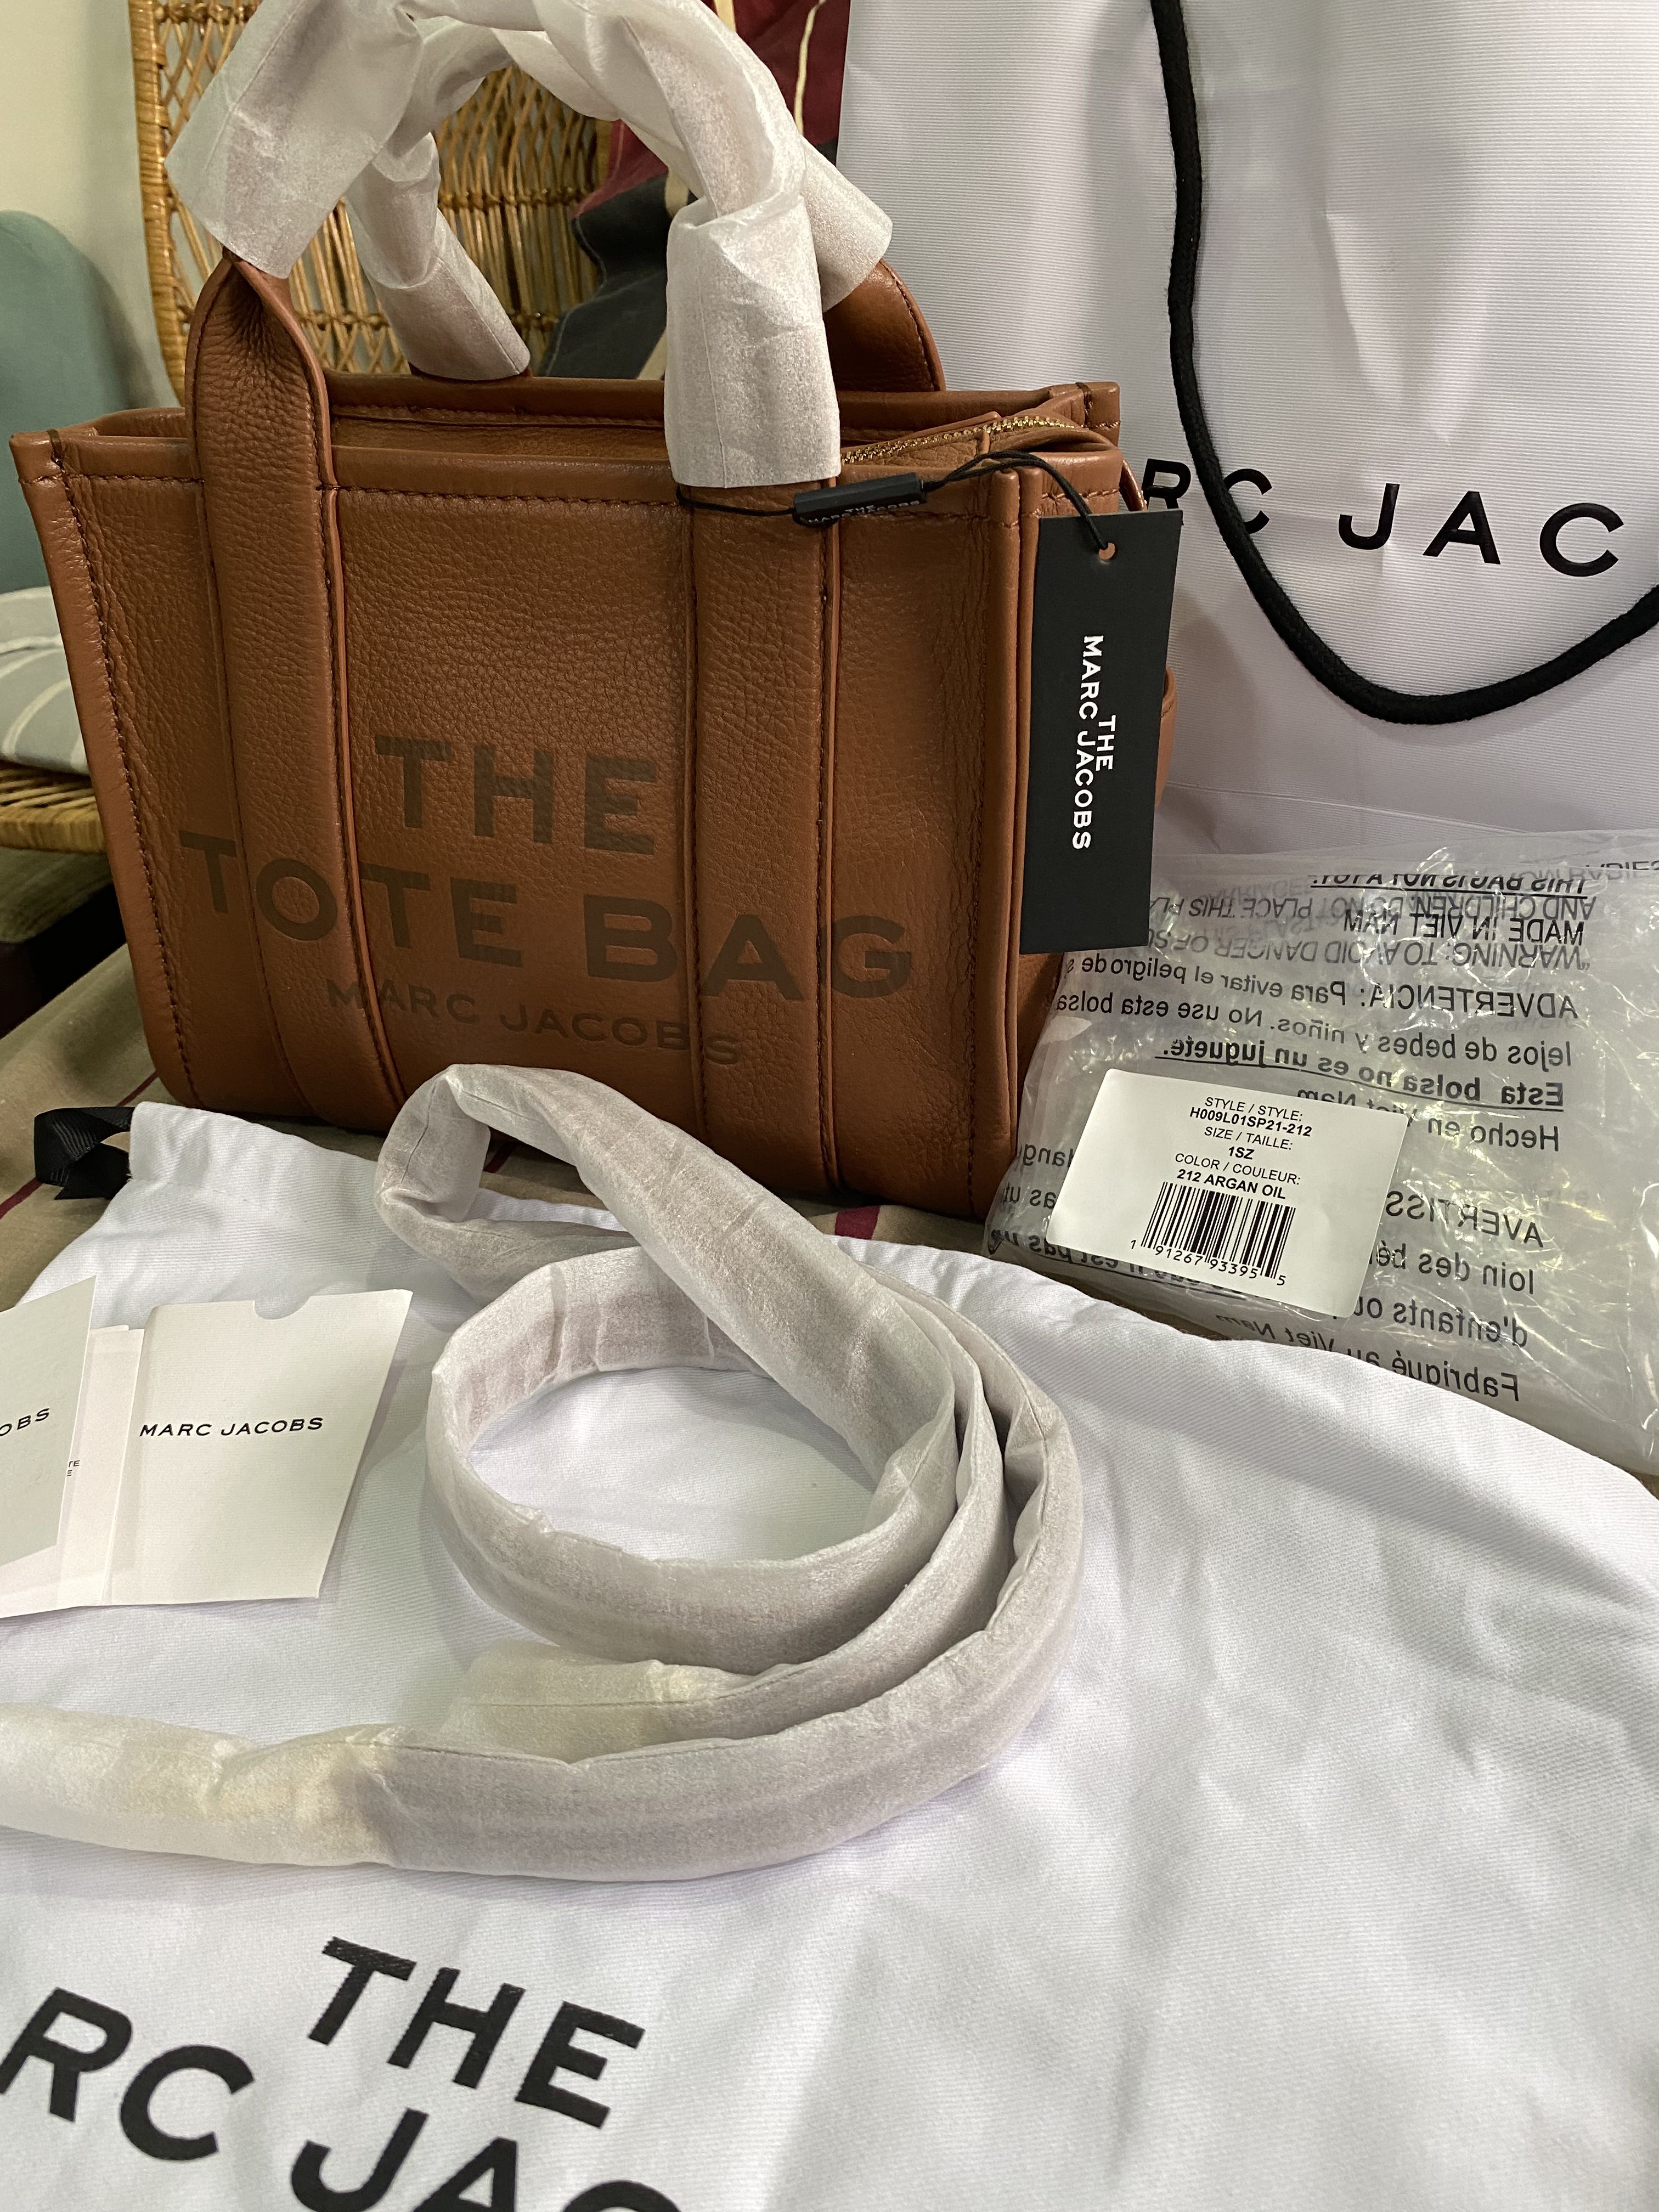 Marc Jacob Authentic lampo zipper, Luxury, Bags & Wallets on Carousell